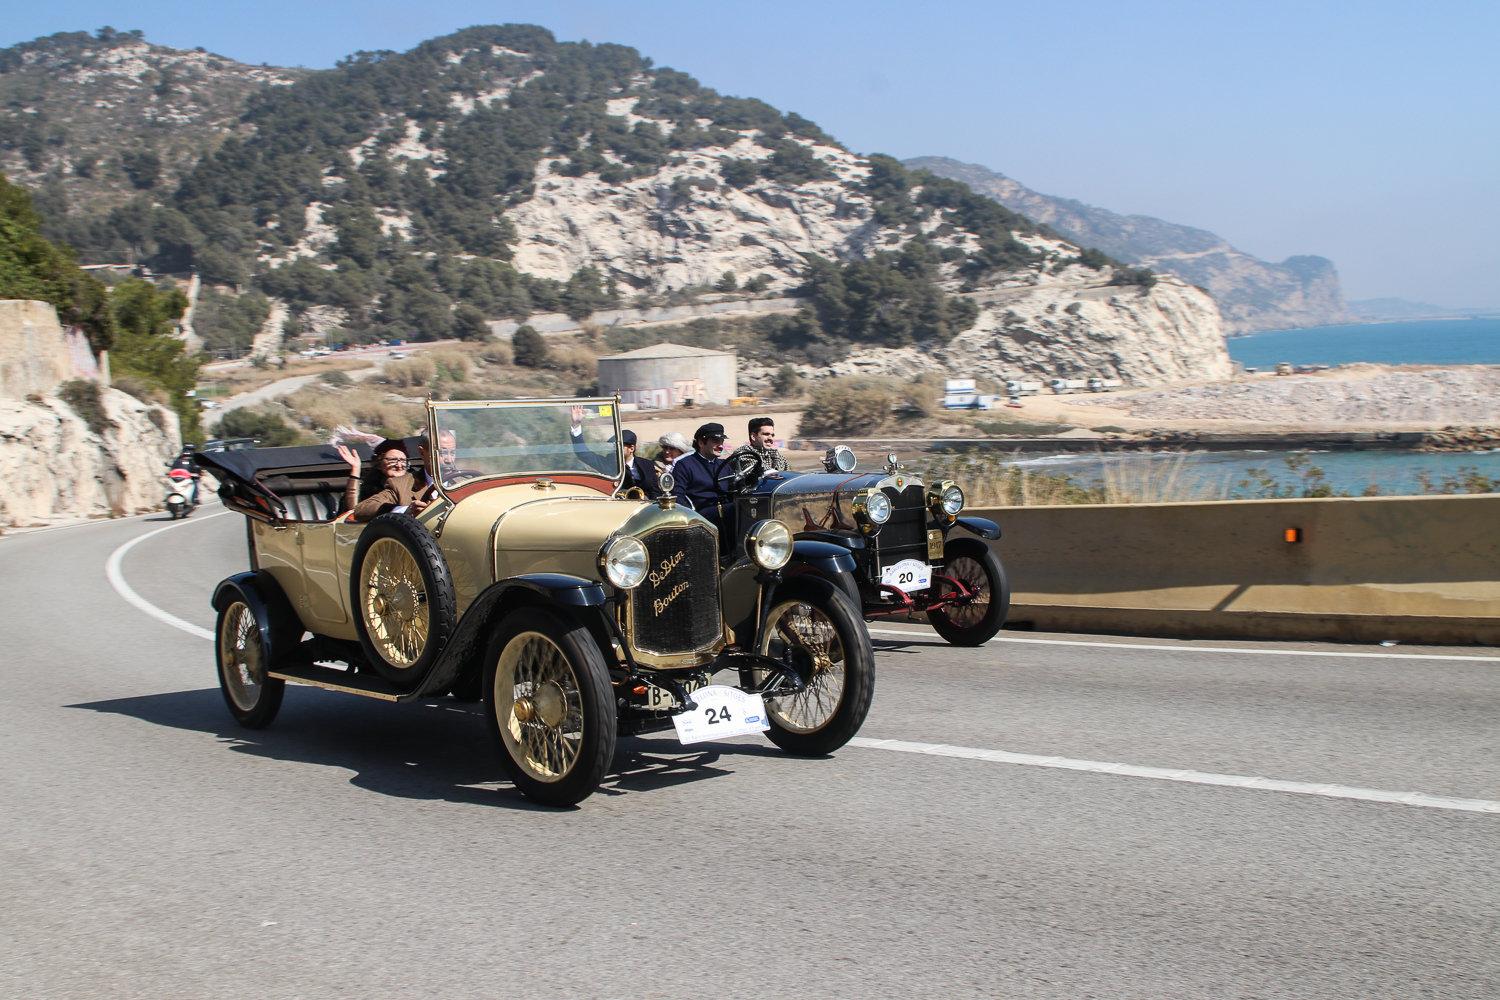 Rally Barcelona-Sitges by Gratis in Barcelona